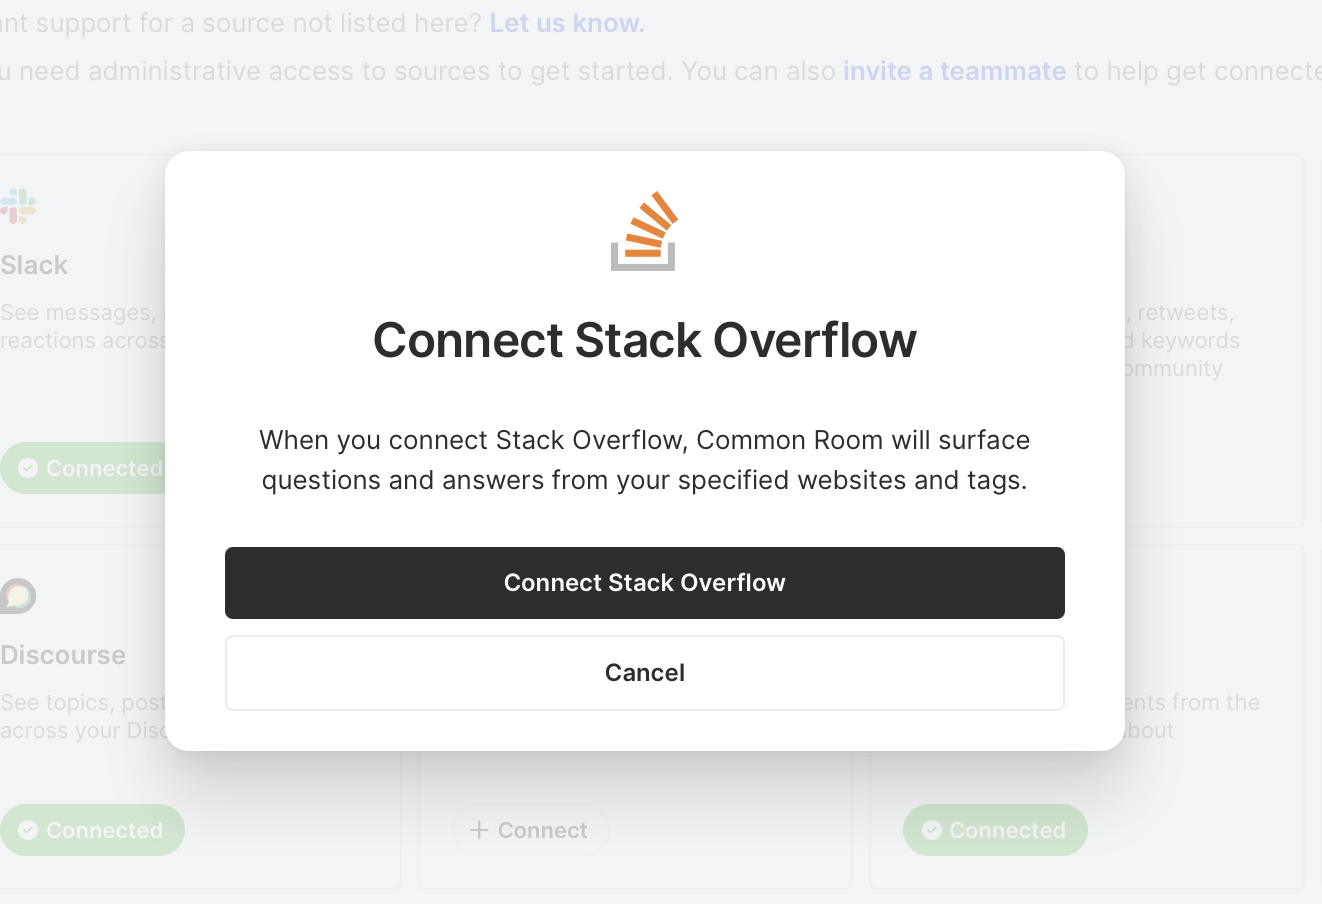 Image of Stack Overflow connection screen in Common Room